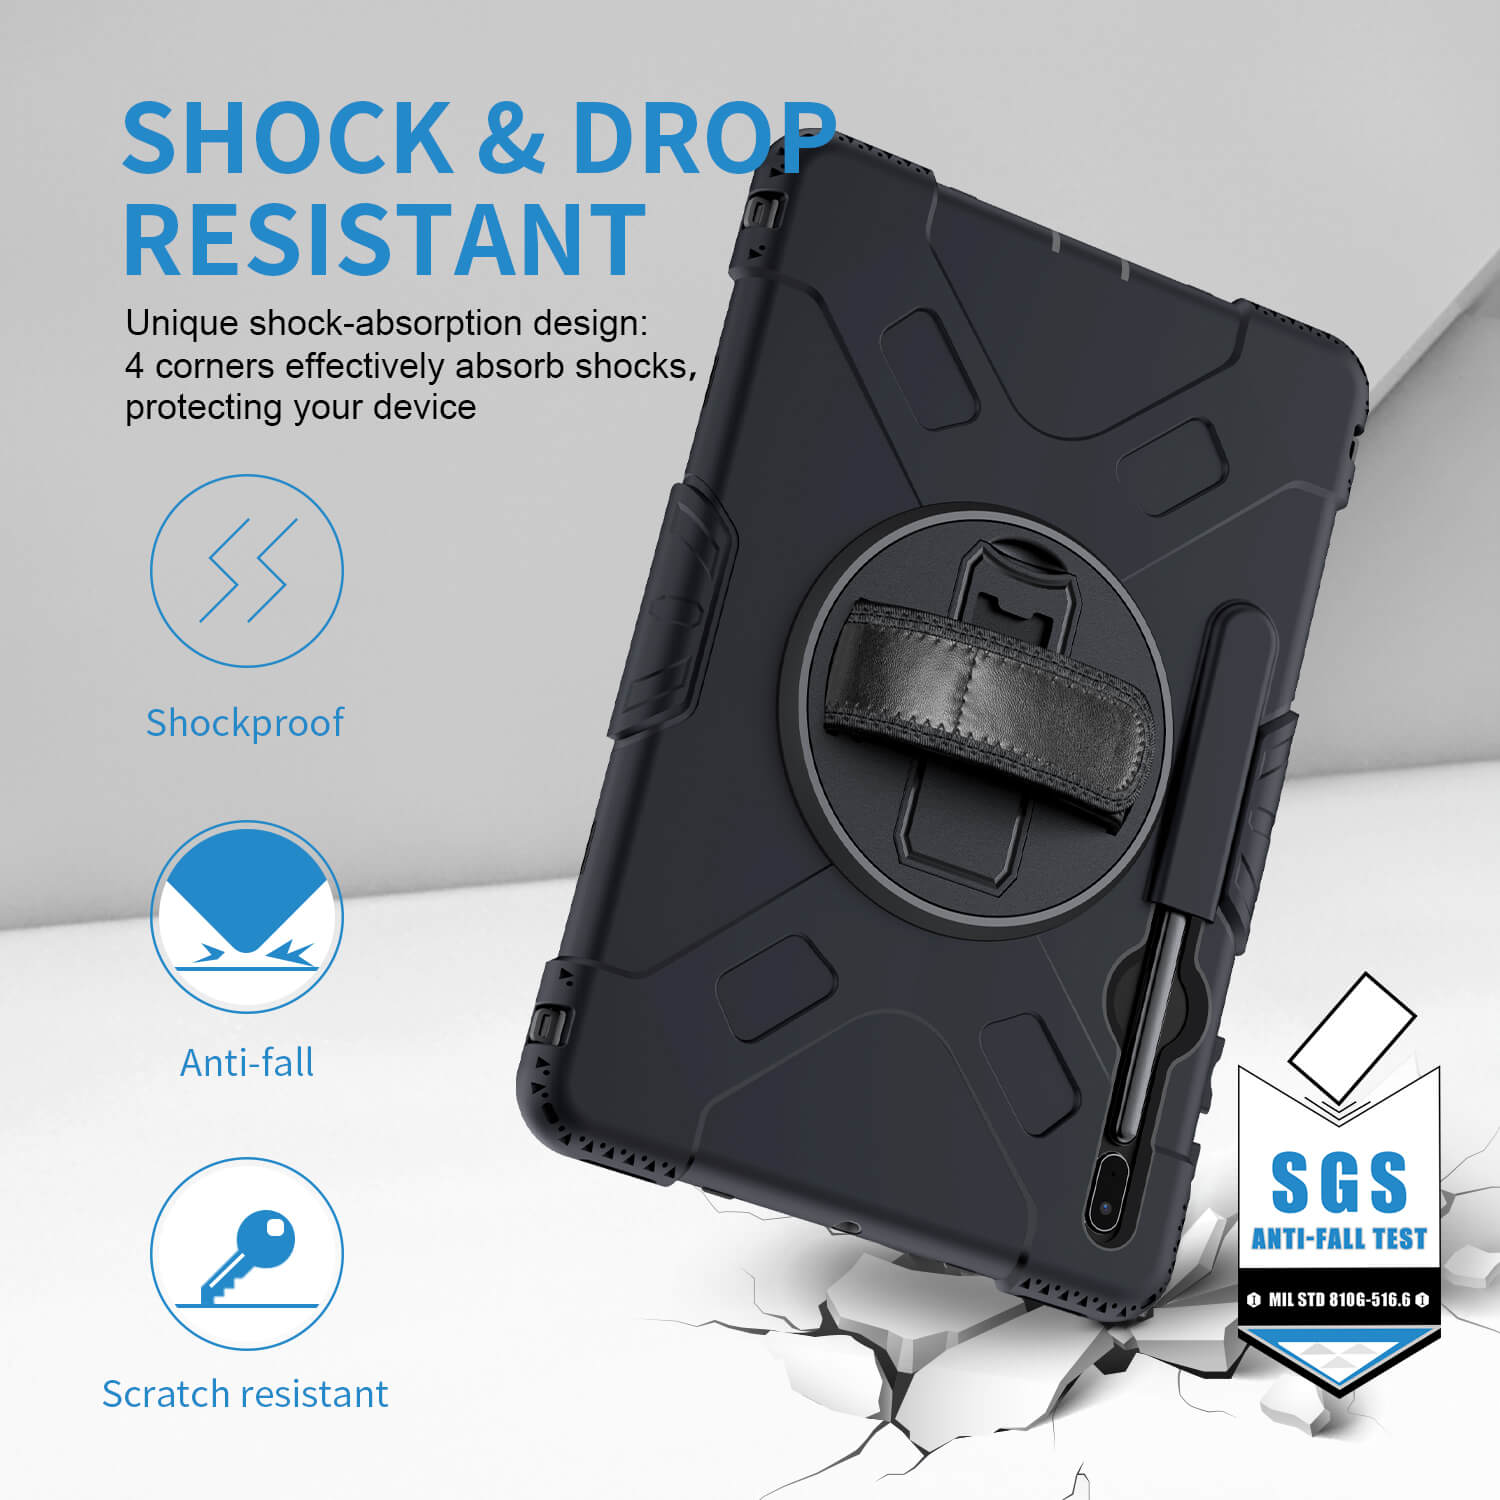 Tough on Samsung Galaxy Tab S7 FE Case Rugged Protection Black